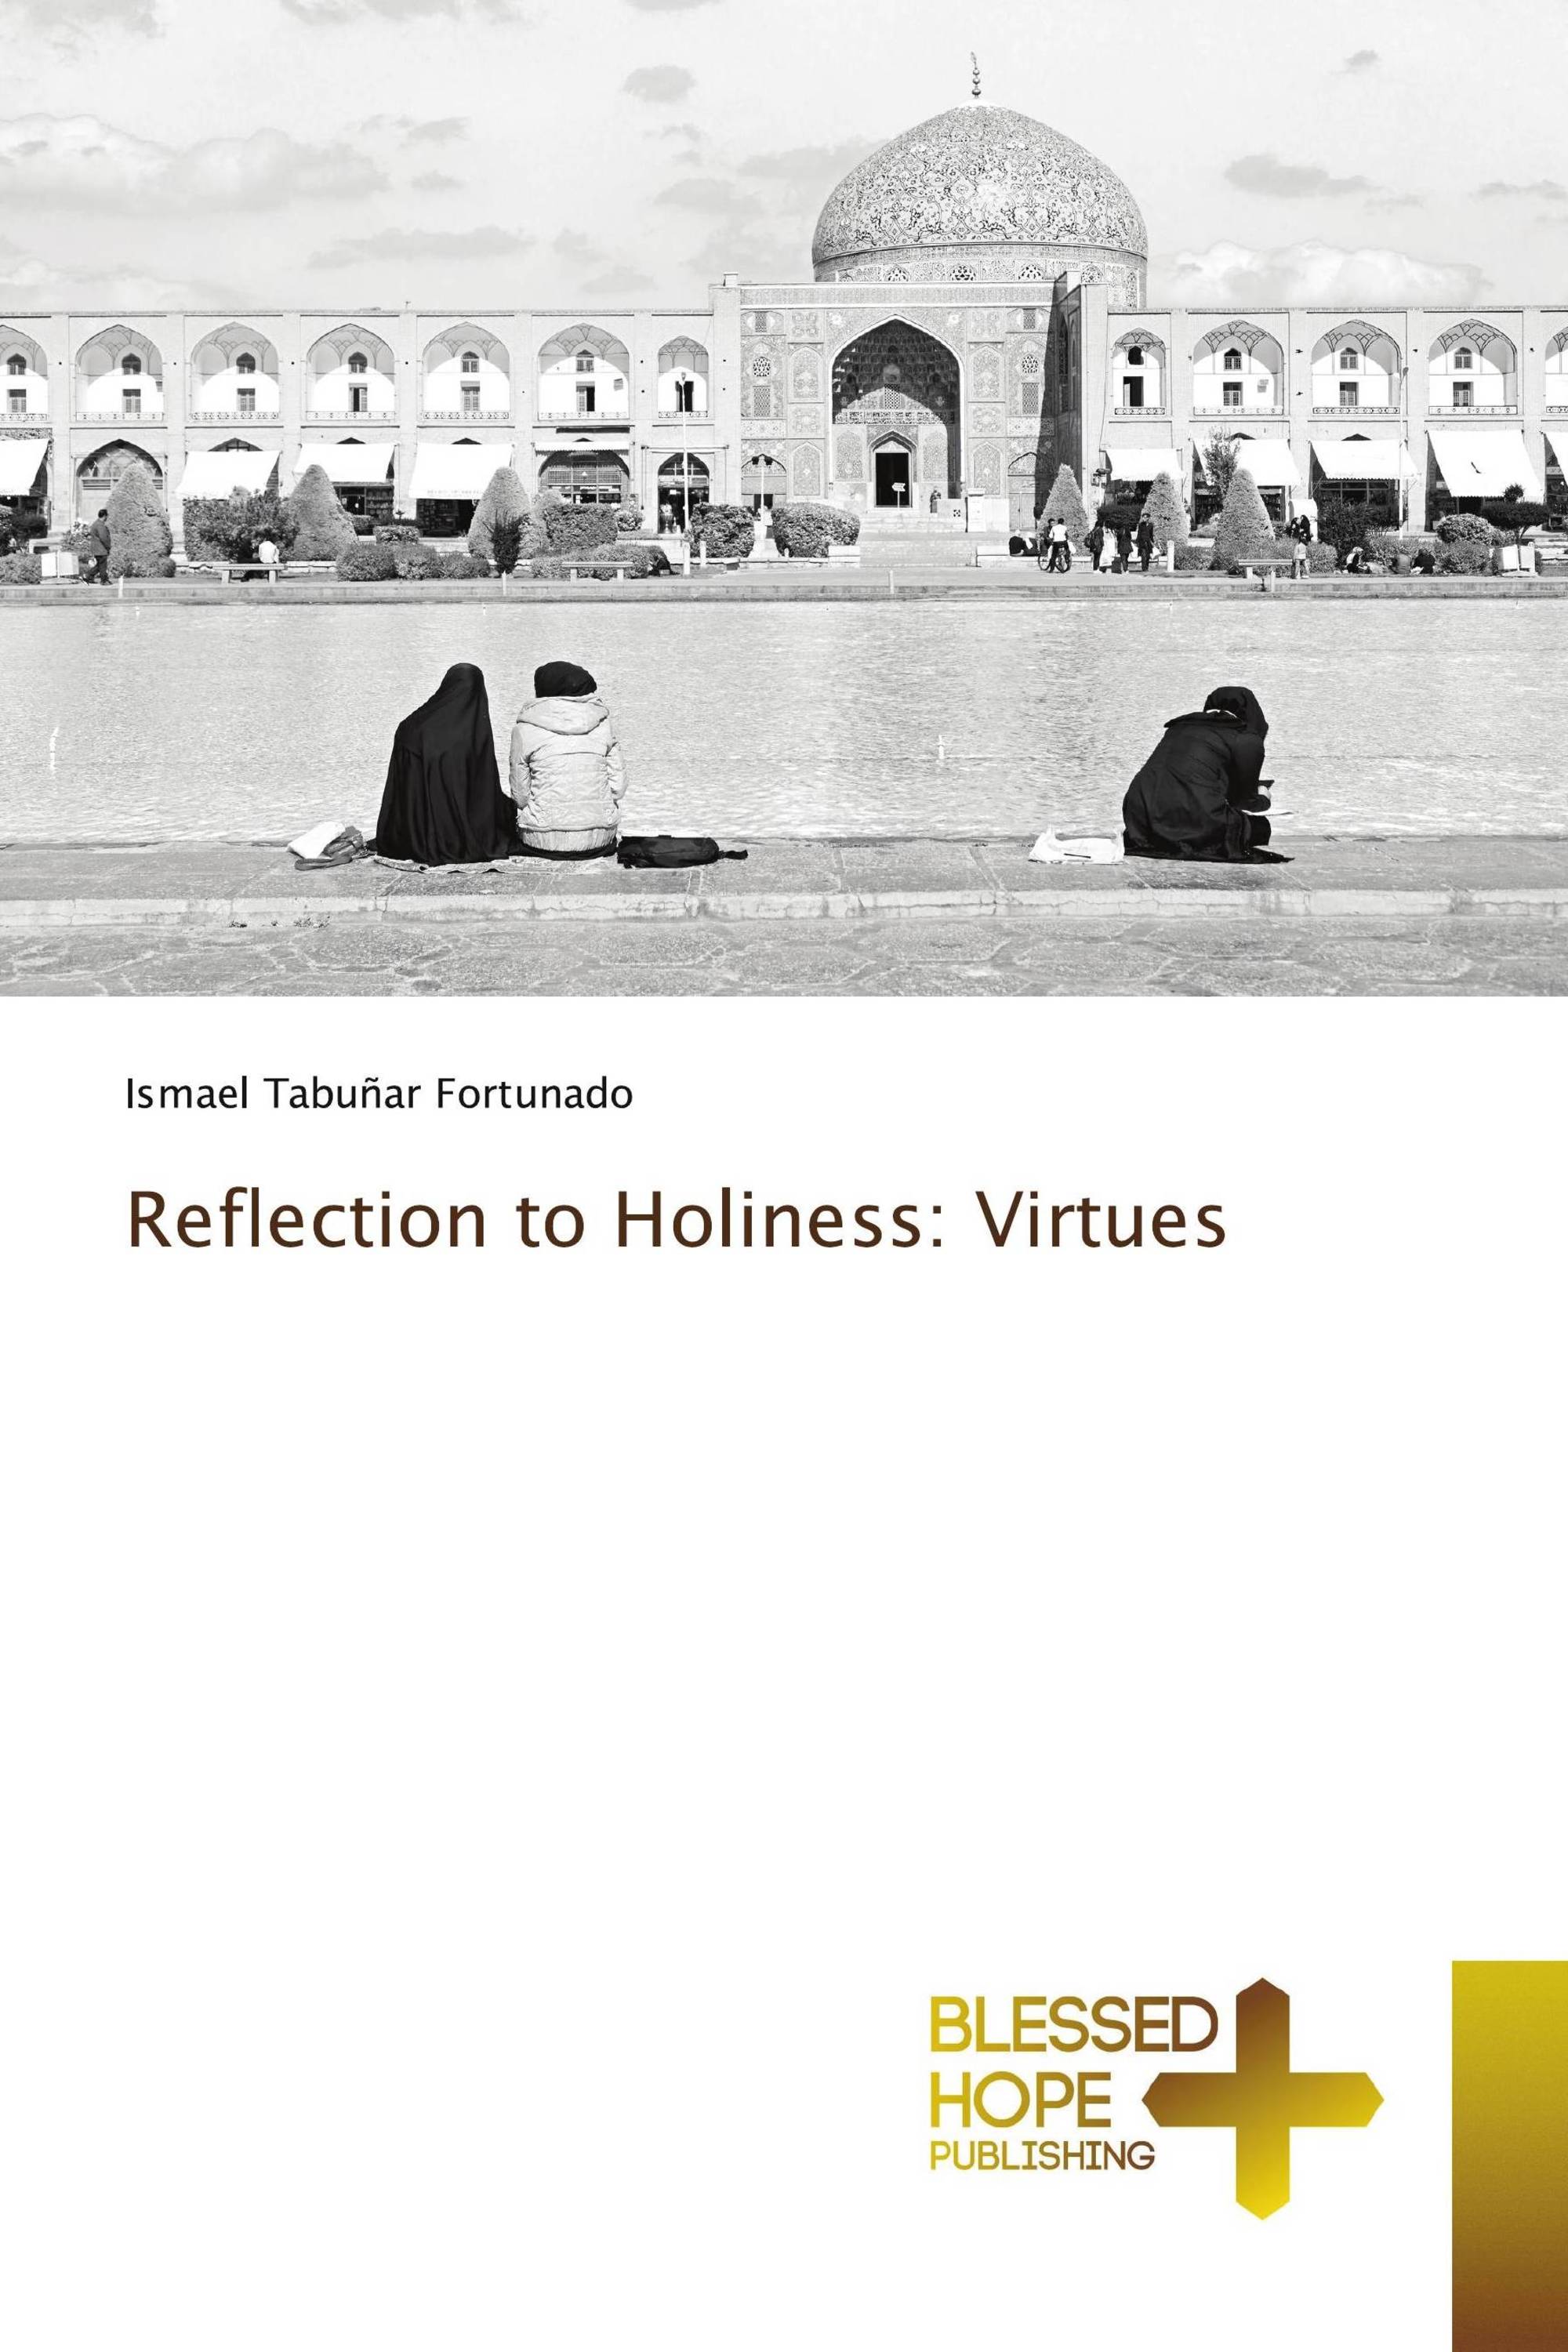 Reflection to Holiness: Virtues